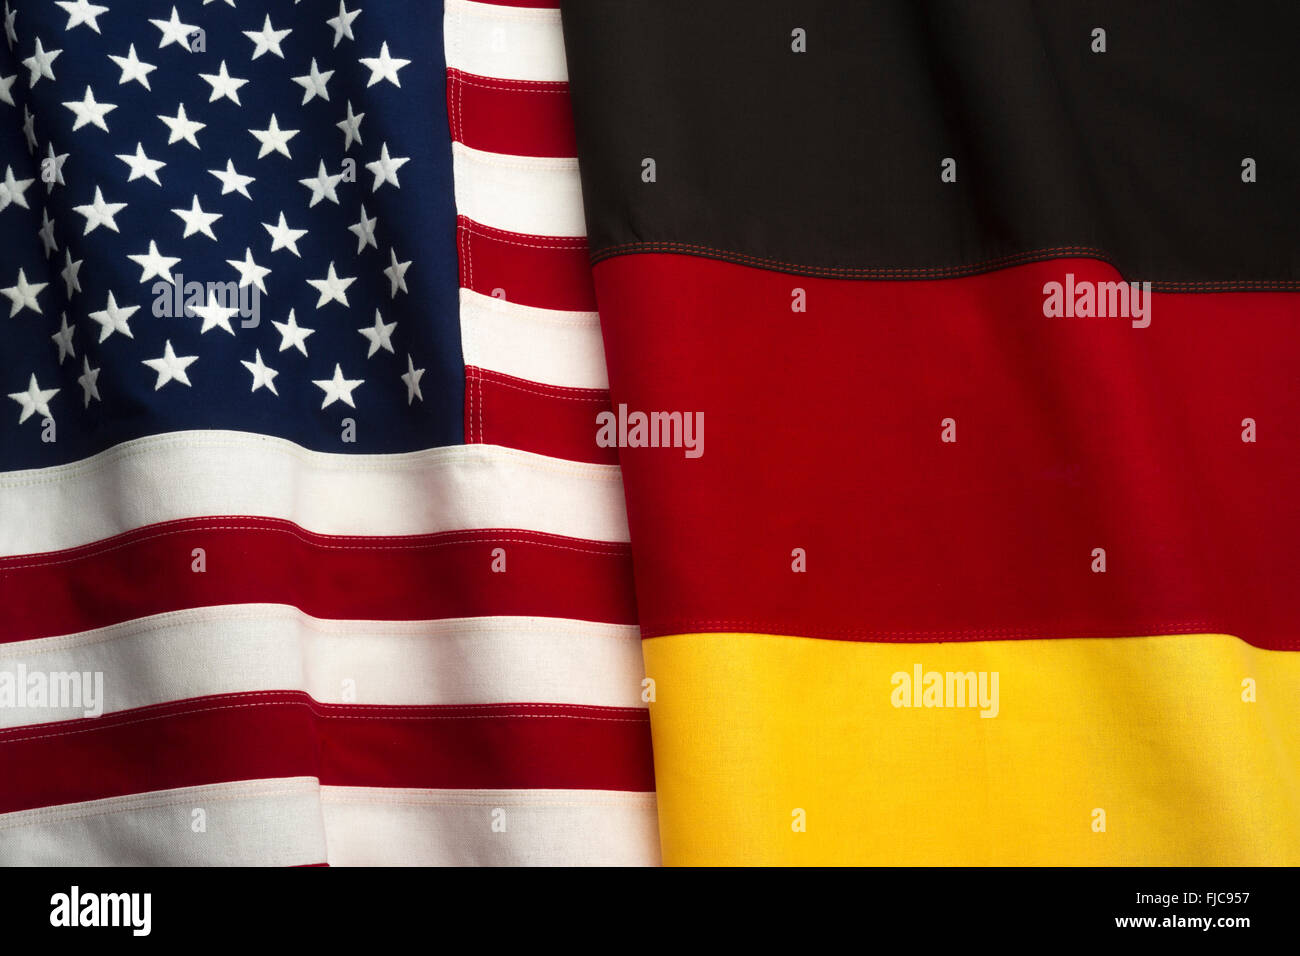 FLAGS OF UNITED STATES OF AMERICA AND GERMANY MADE OF STITCHED COTTON BUNTING Stock Photo